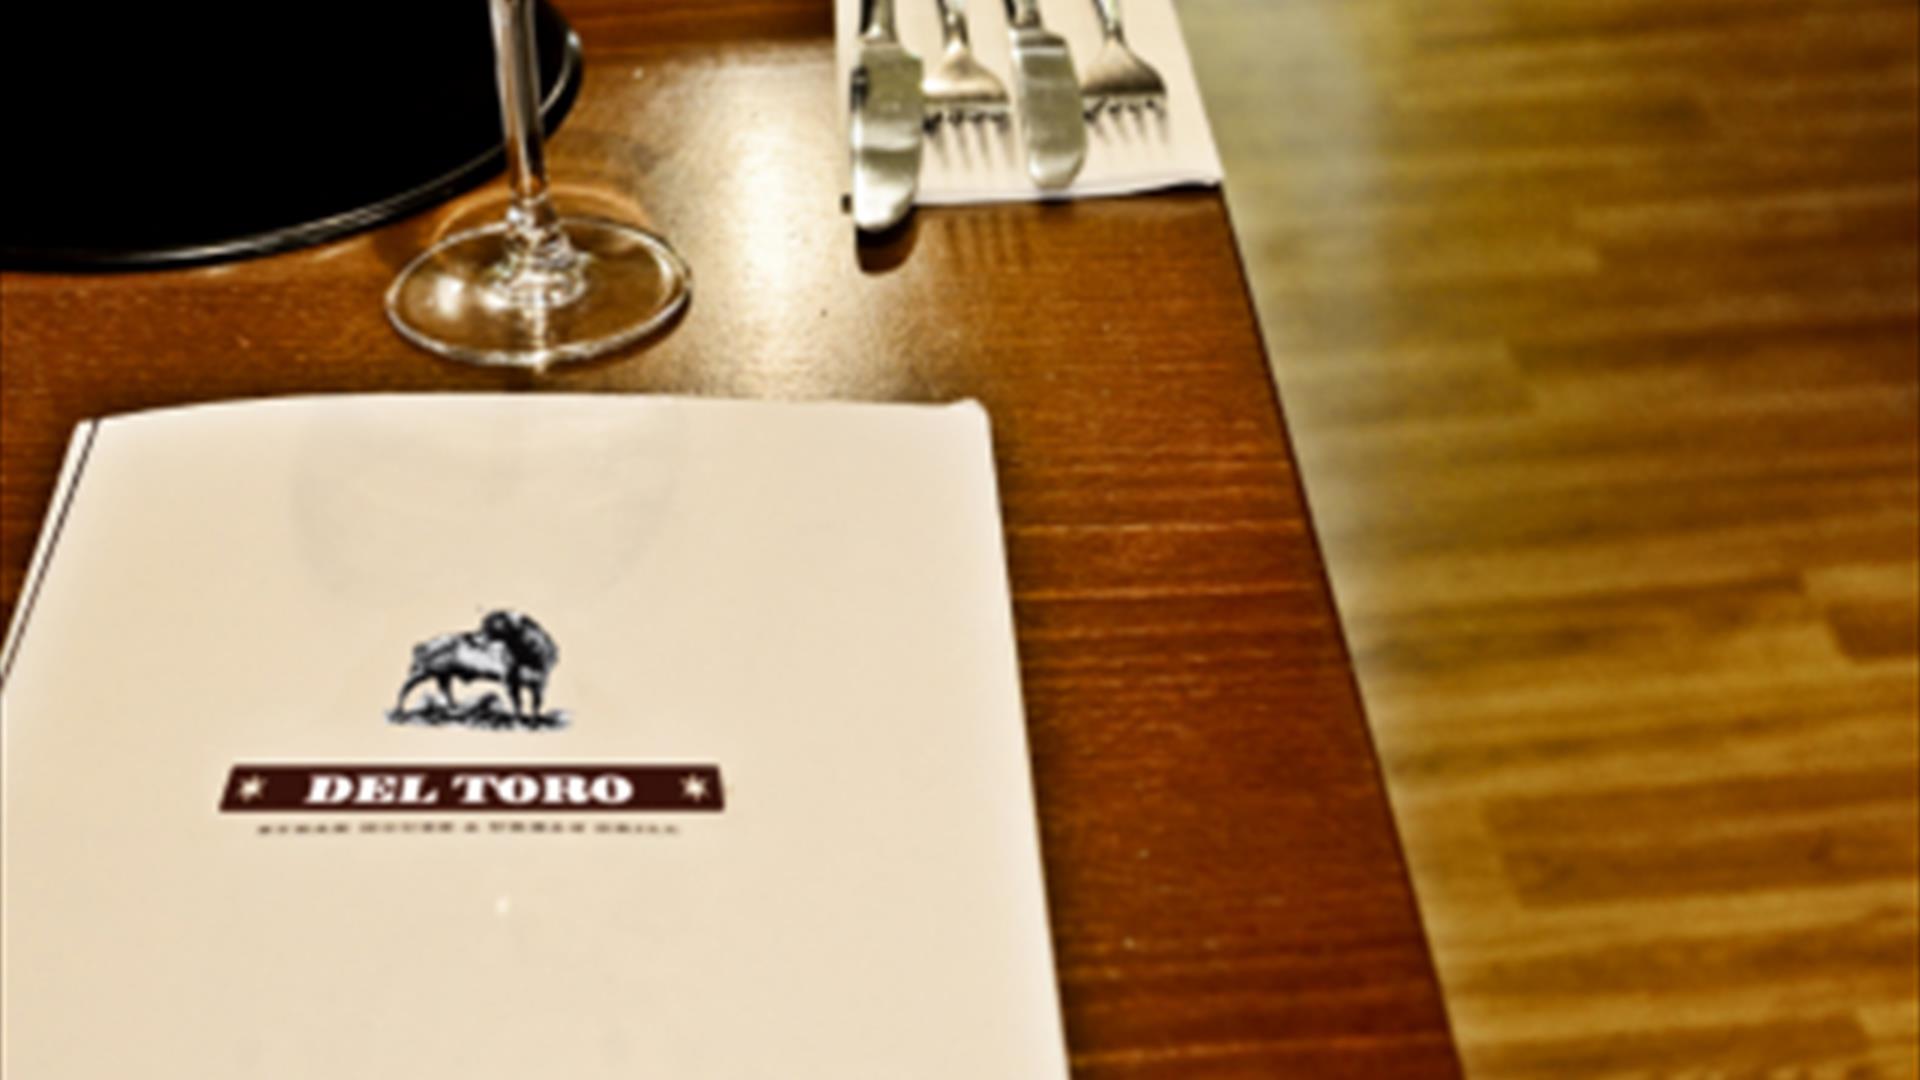 Images shows table laid with cutlery and wine glass with Del Toro restaurant menu also on table